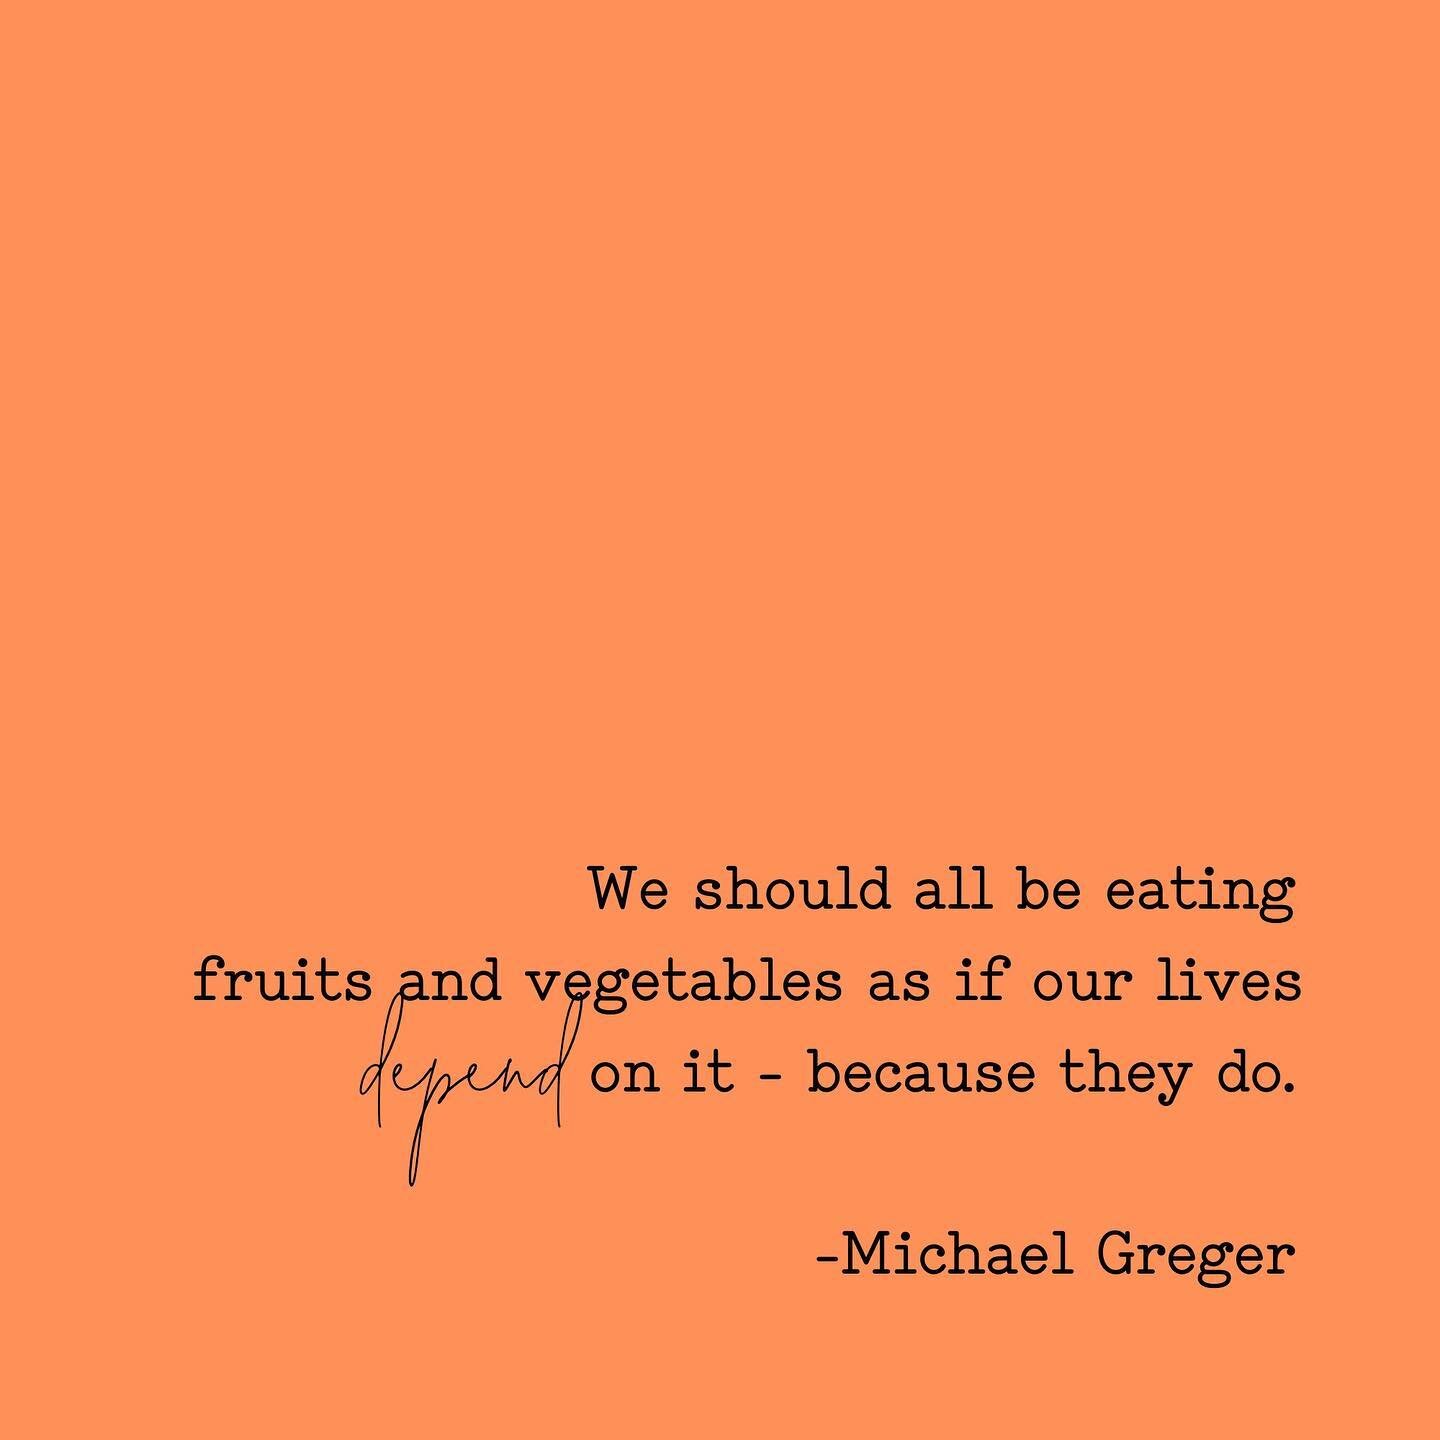 Sunday&rsquo;s food for thought. 🍏🍊🍋🍌🍉🍓🫐🍒🍑🥭🍆🥑🥦🥒🌽🥕